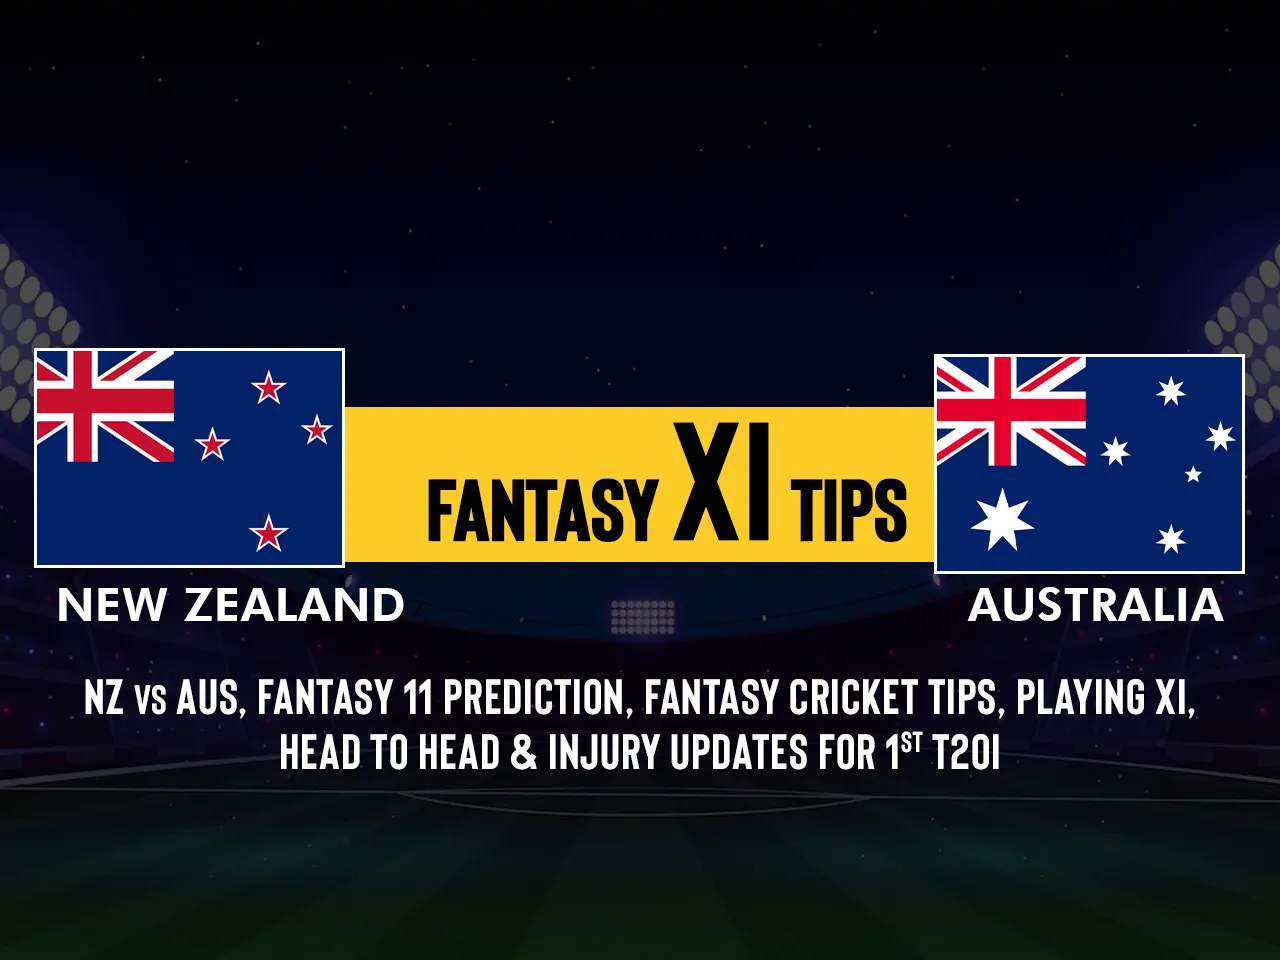 NZ vs AUS Dream11 Prediction, Fantasy Cricket Tips, Playing XI, Pitch Report & Injury Updates For 1st T20I